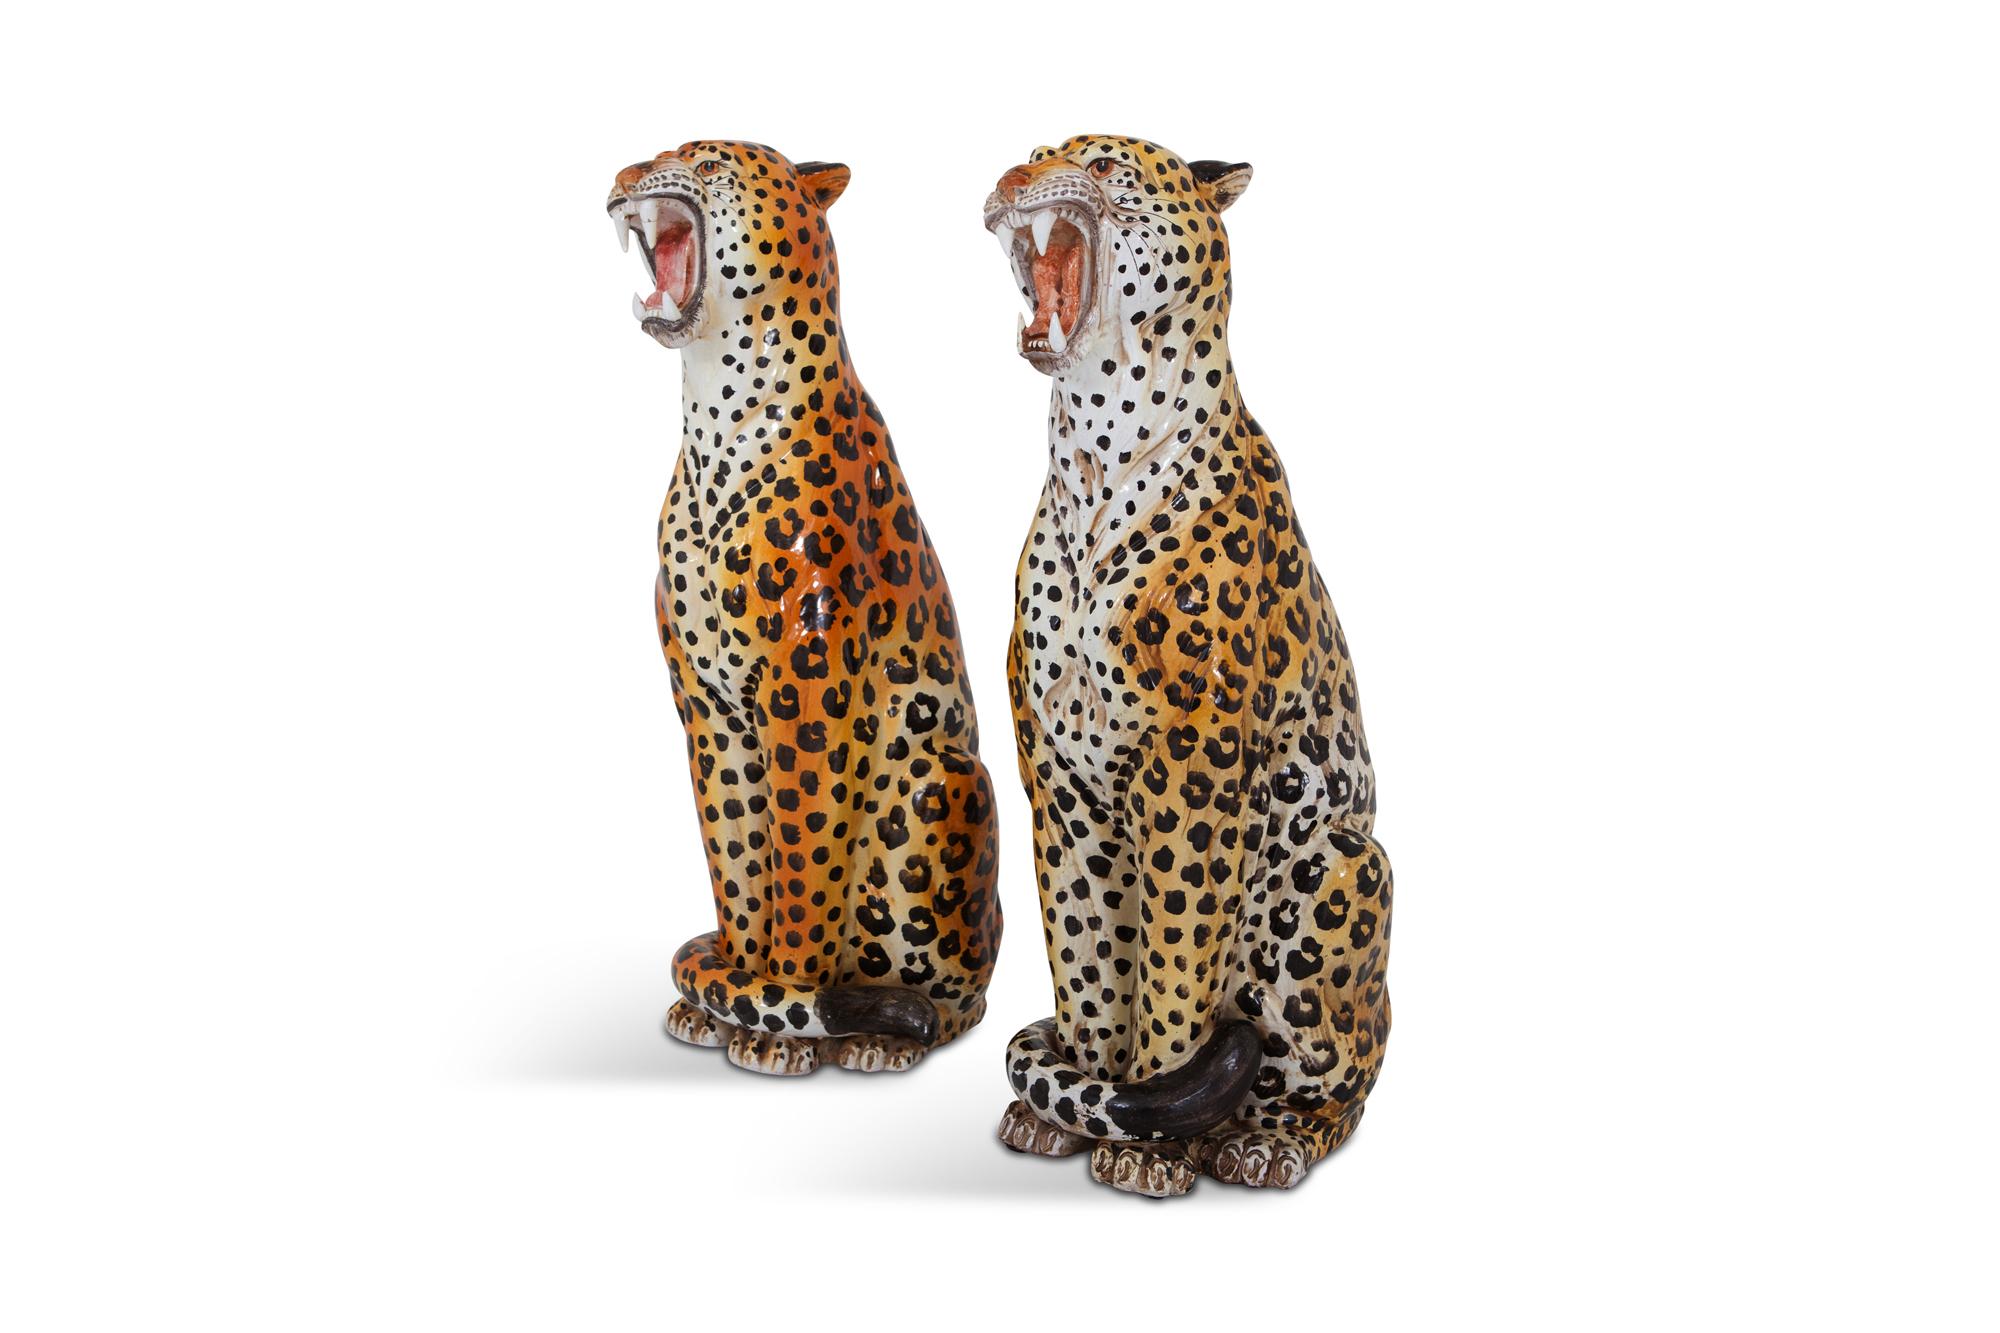 Ceramic seating leopard sculptures from Italy in the 1950s. 

Rare vintage pieces especially as a pair.

Would fit well in a Hollywood regency, Italian glam style eclectic interior.

Measures: A. W 34, D 46, H 83 cm
B. W 34, D 52, H 82 cm.